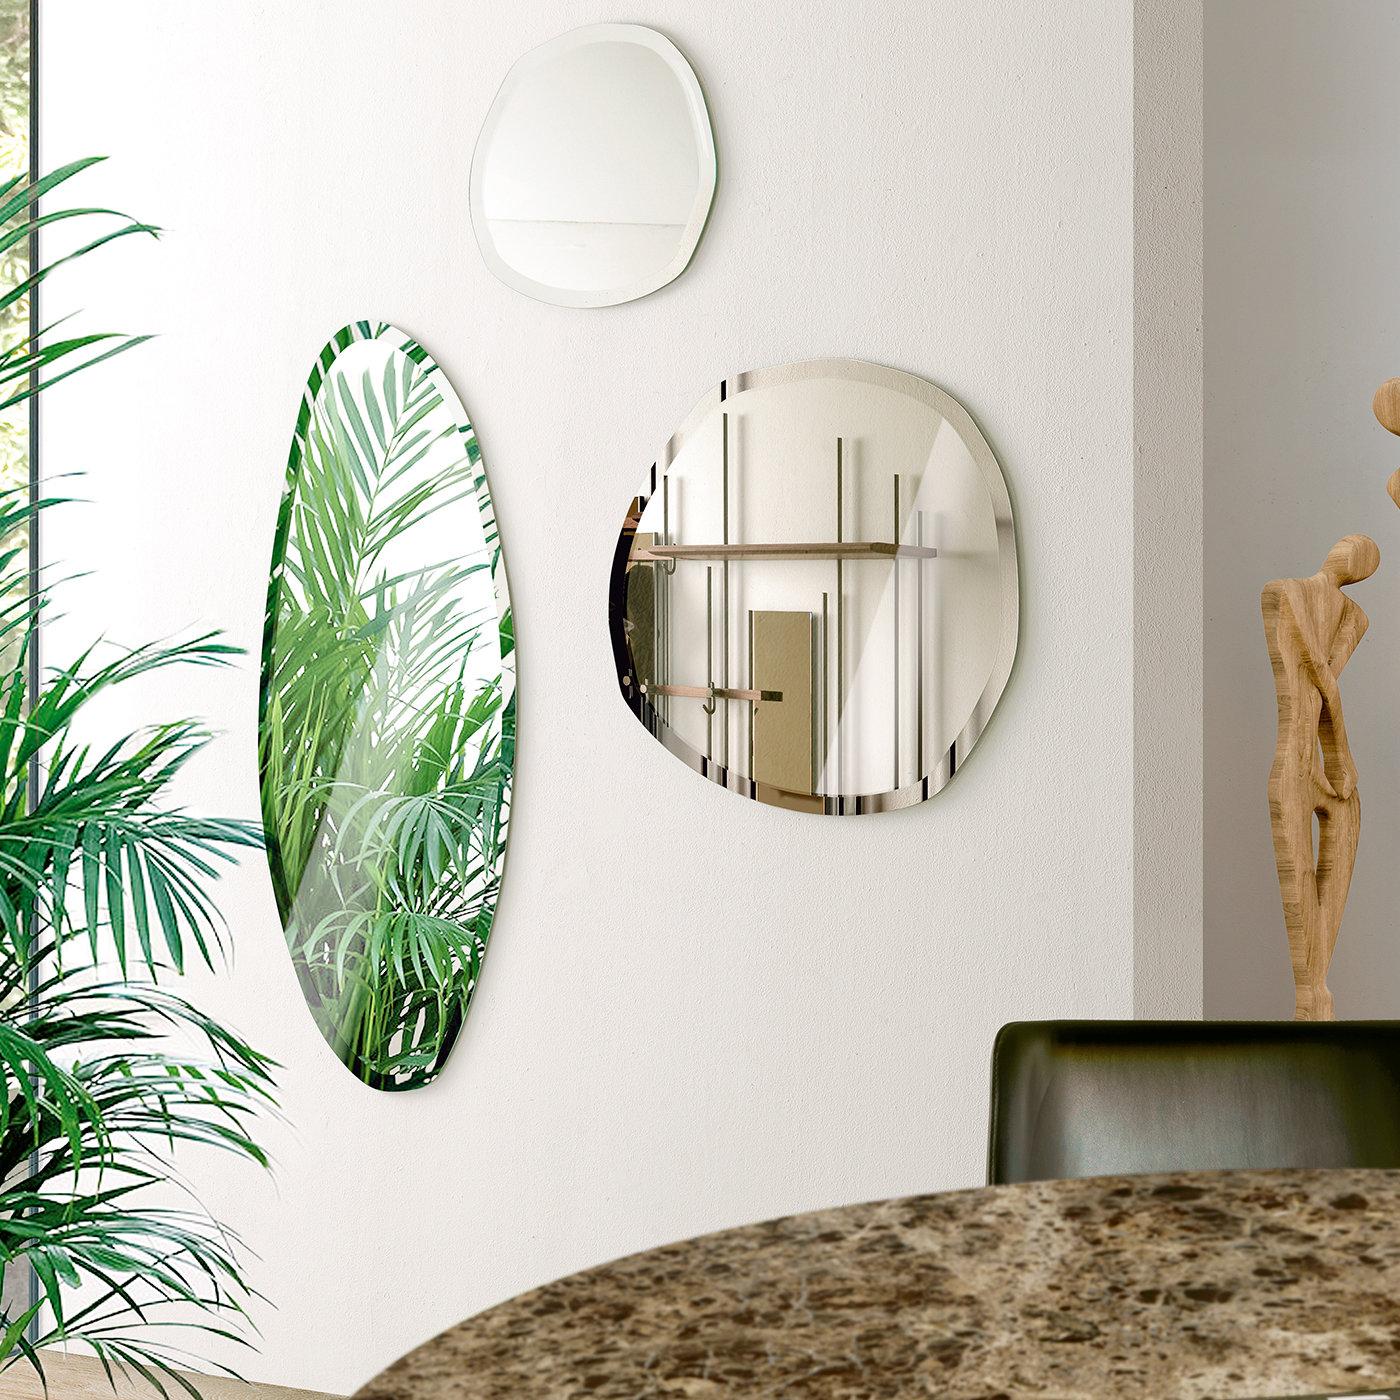 Eccentric and minimalist, this elegant round wall mirror by Norberto Delfinetti will be a captivating object of functional decor in a contemporary interior. Characterized by beveled edges that evoke natural stone's irregular, charming shapes, the